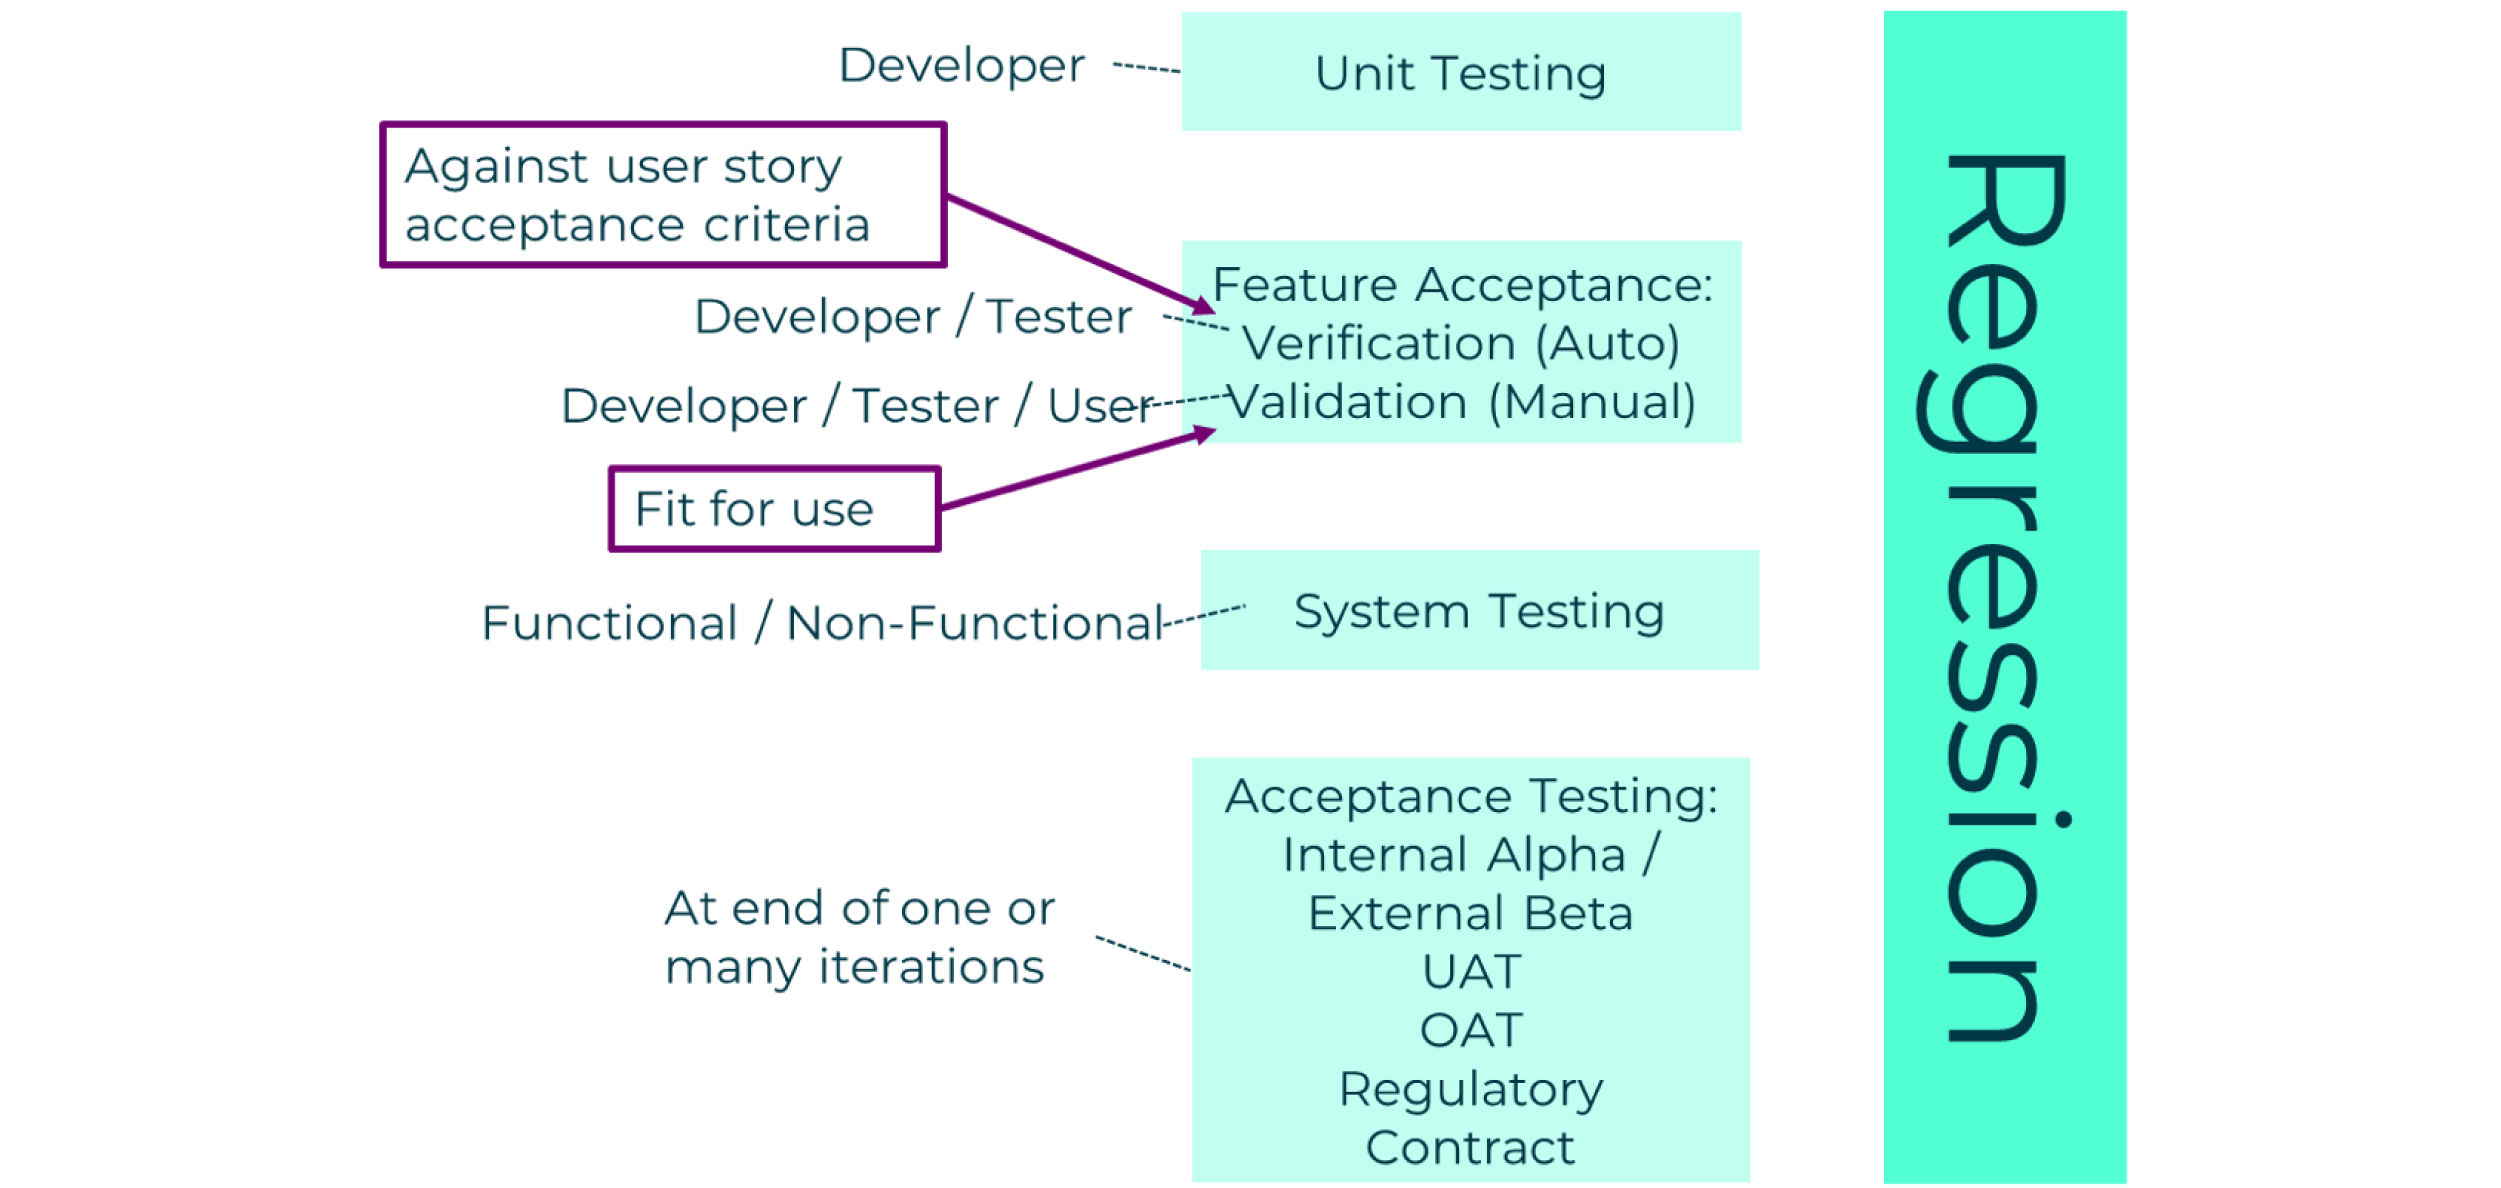 A diagram shows the type of testing and the role/s responsible, as described above.